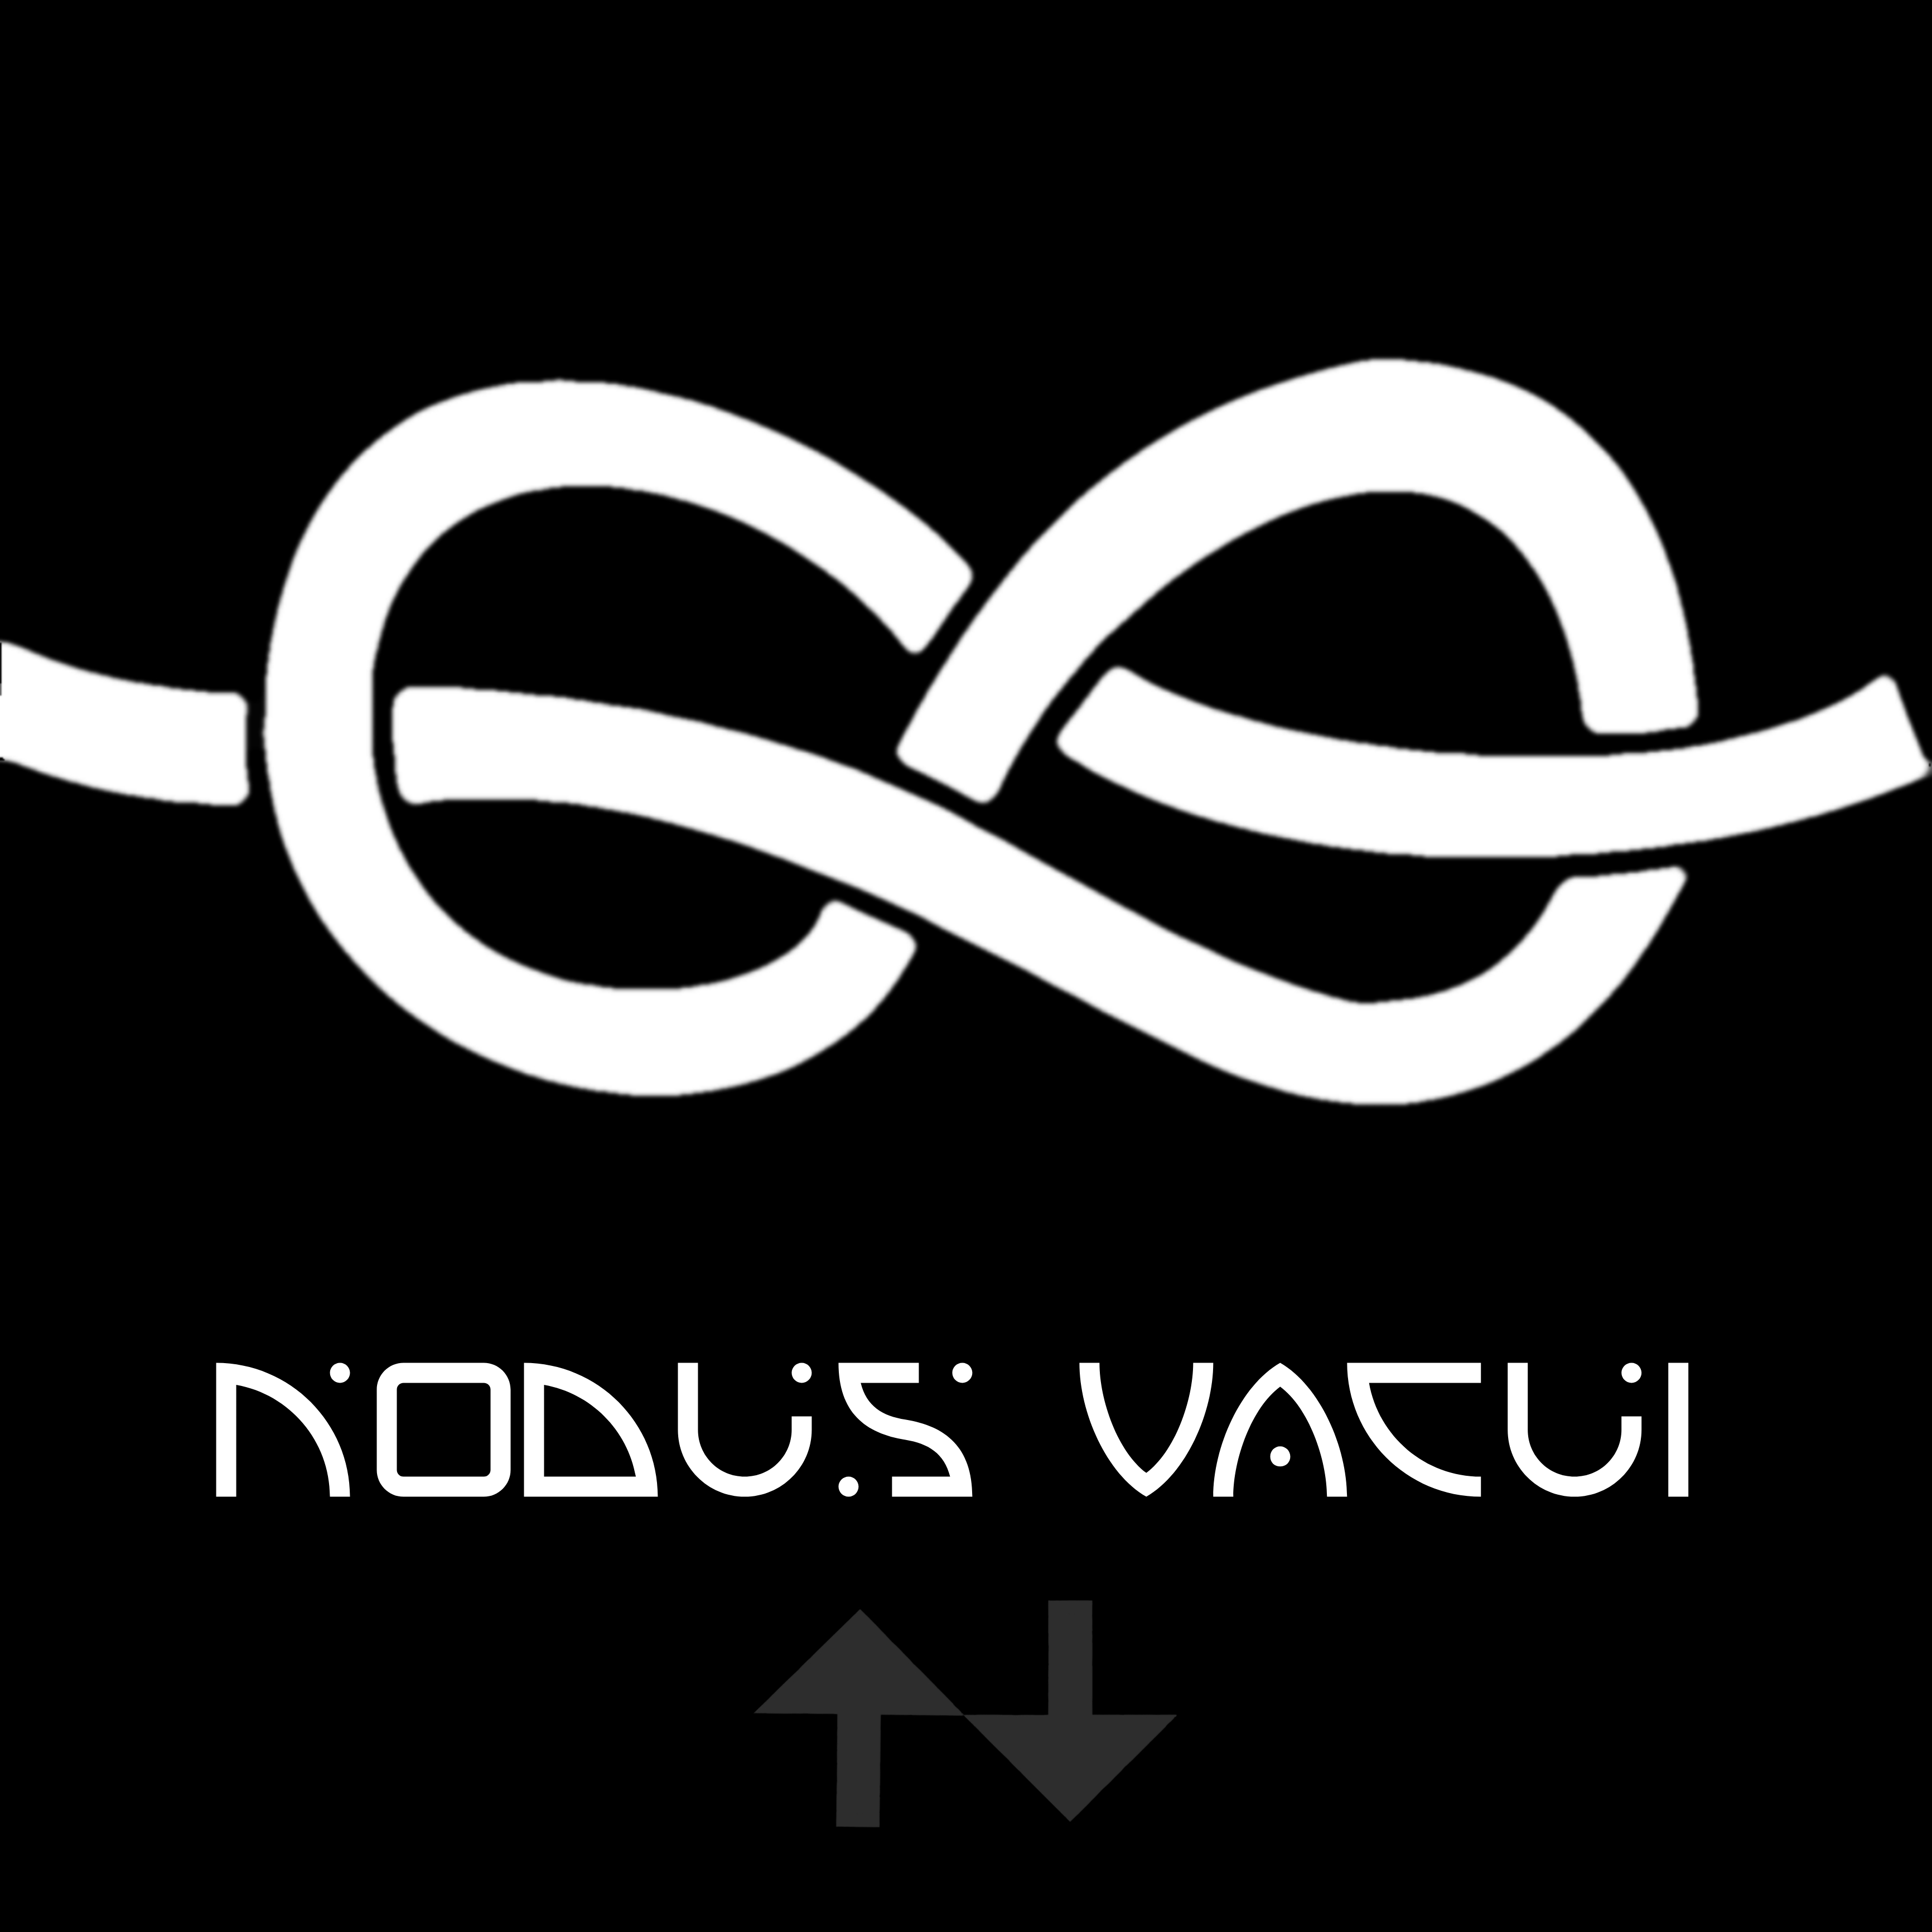 <b>Nodus Vacui - Void knot</b><br/><br/>Nodus Vacui is latin and stands for "void knot". It encapsulates the idea of mathematical reality turning into physical reality by looping into itself multiple times and forming a knot.